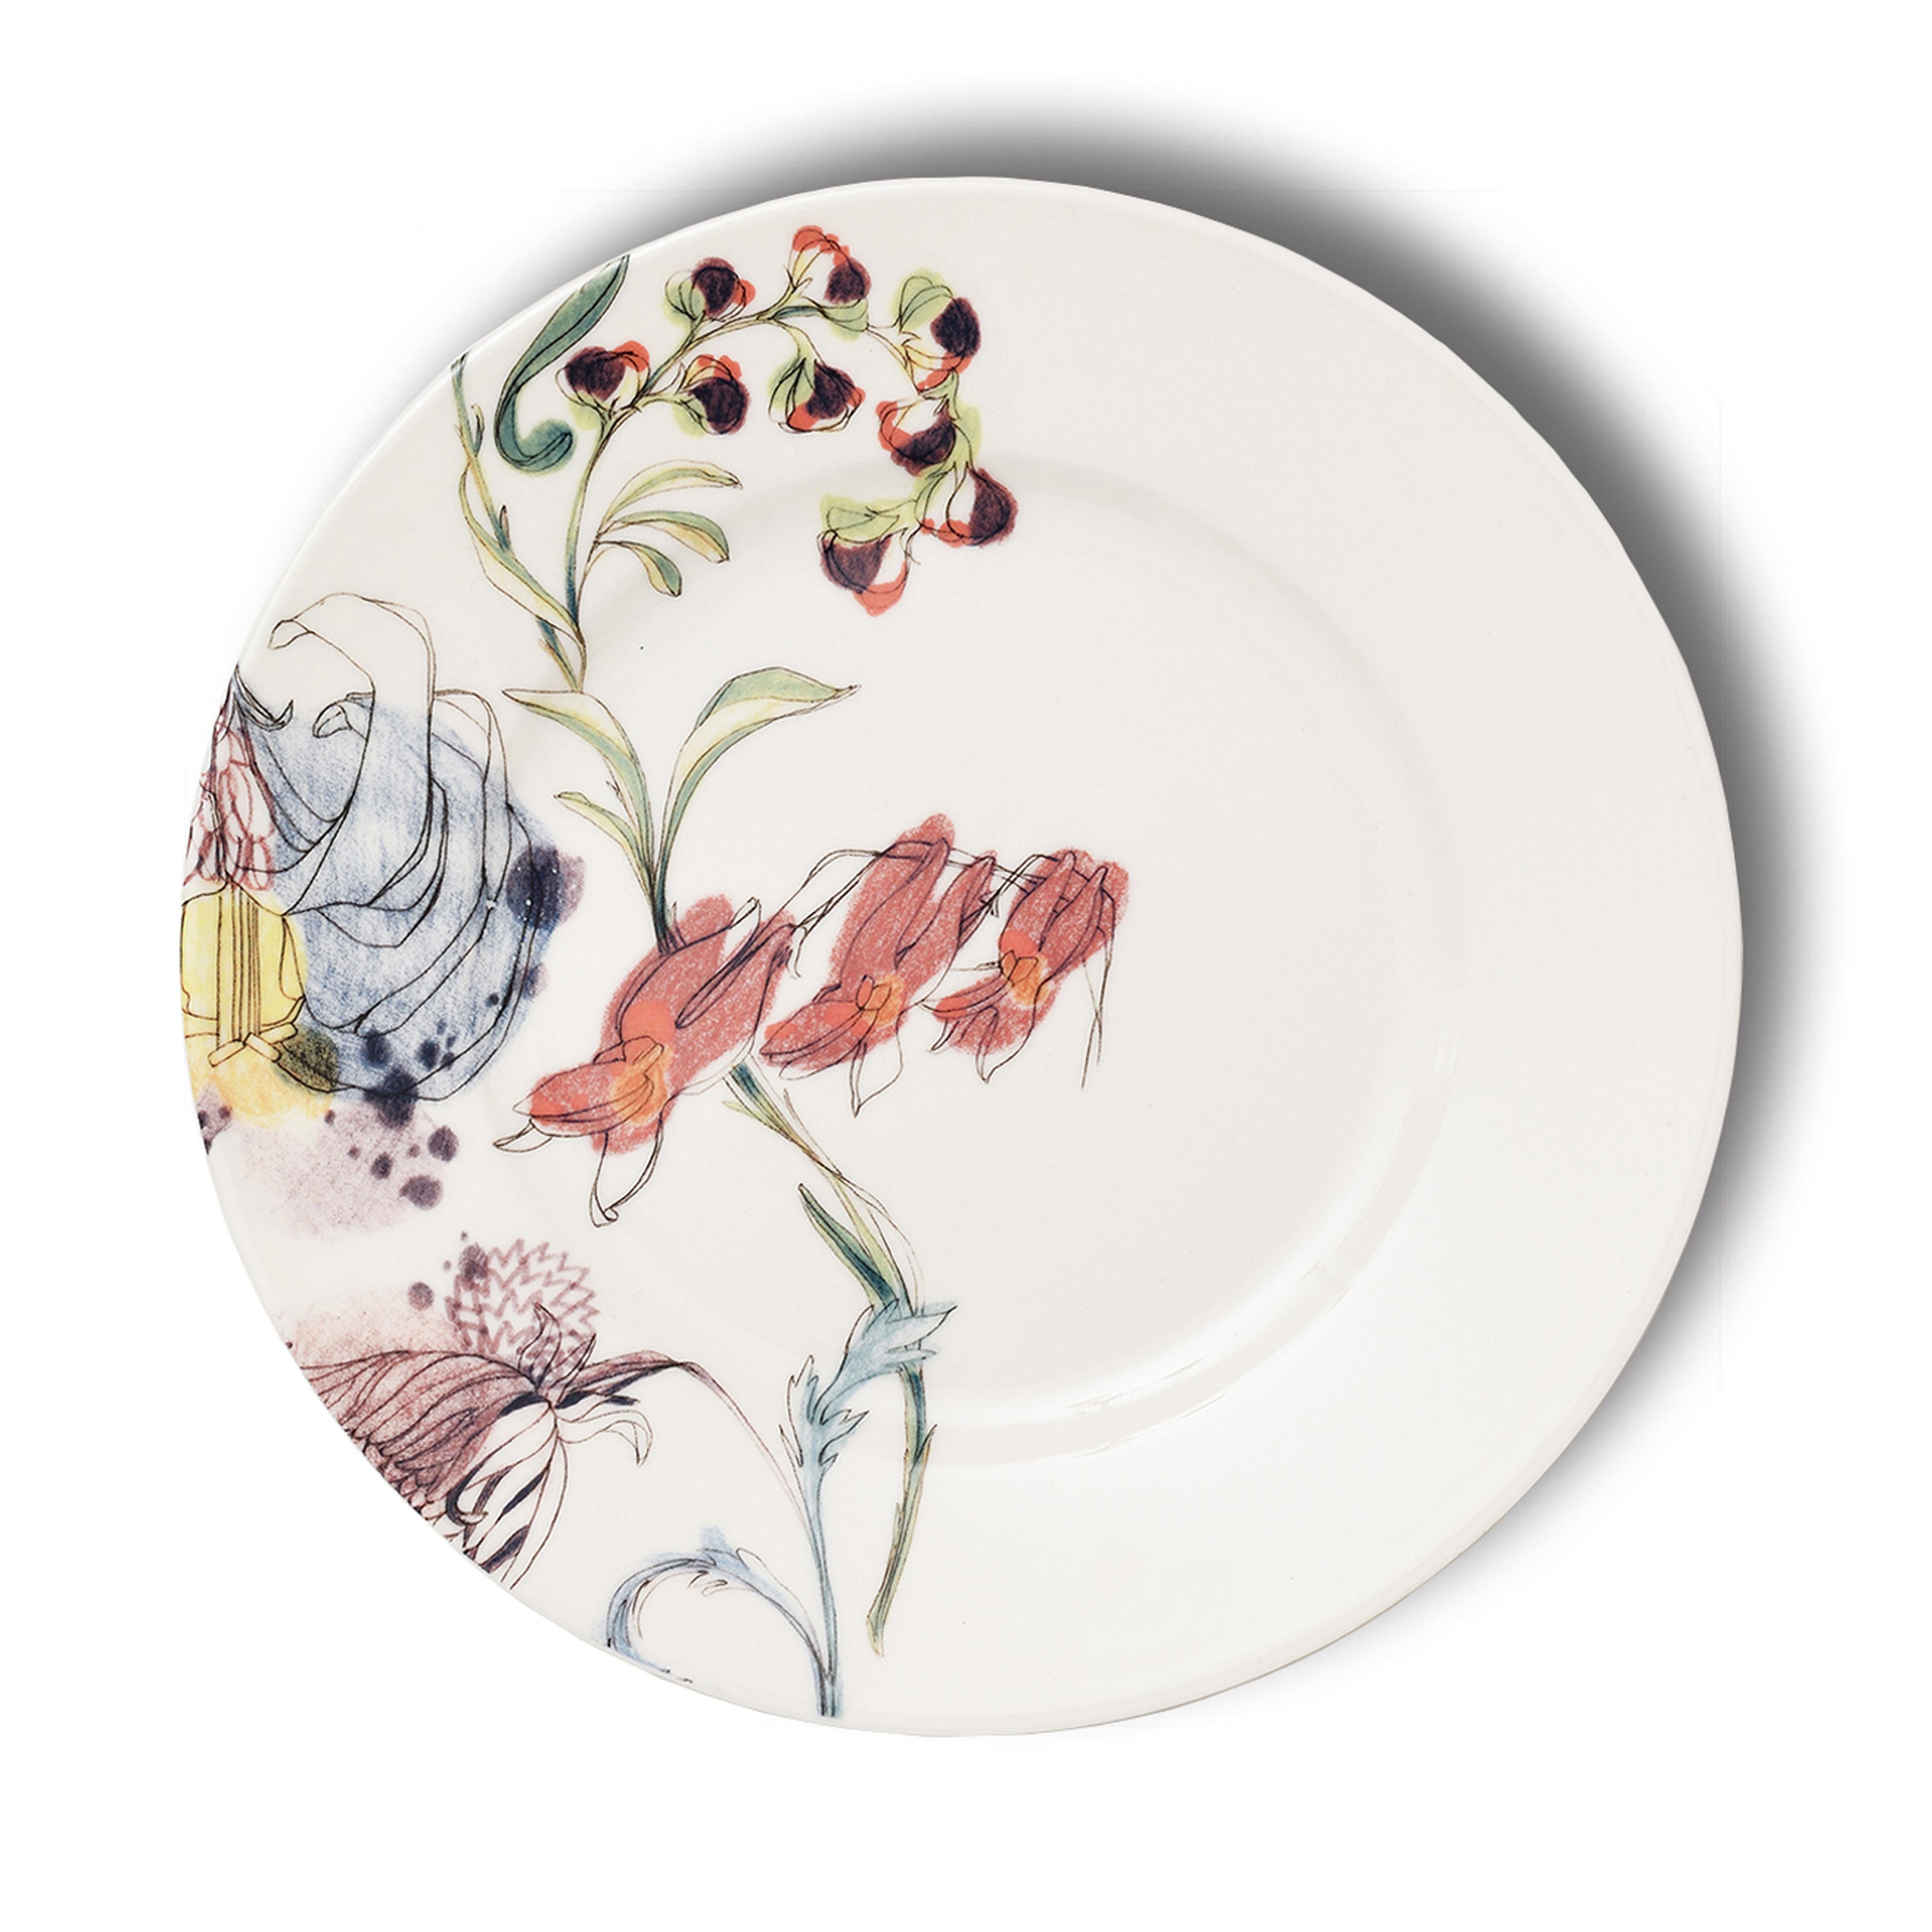 If you are looking for an unique tableware in order to make your lunch special and chic every day, this 